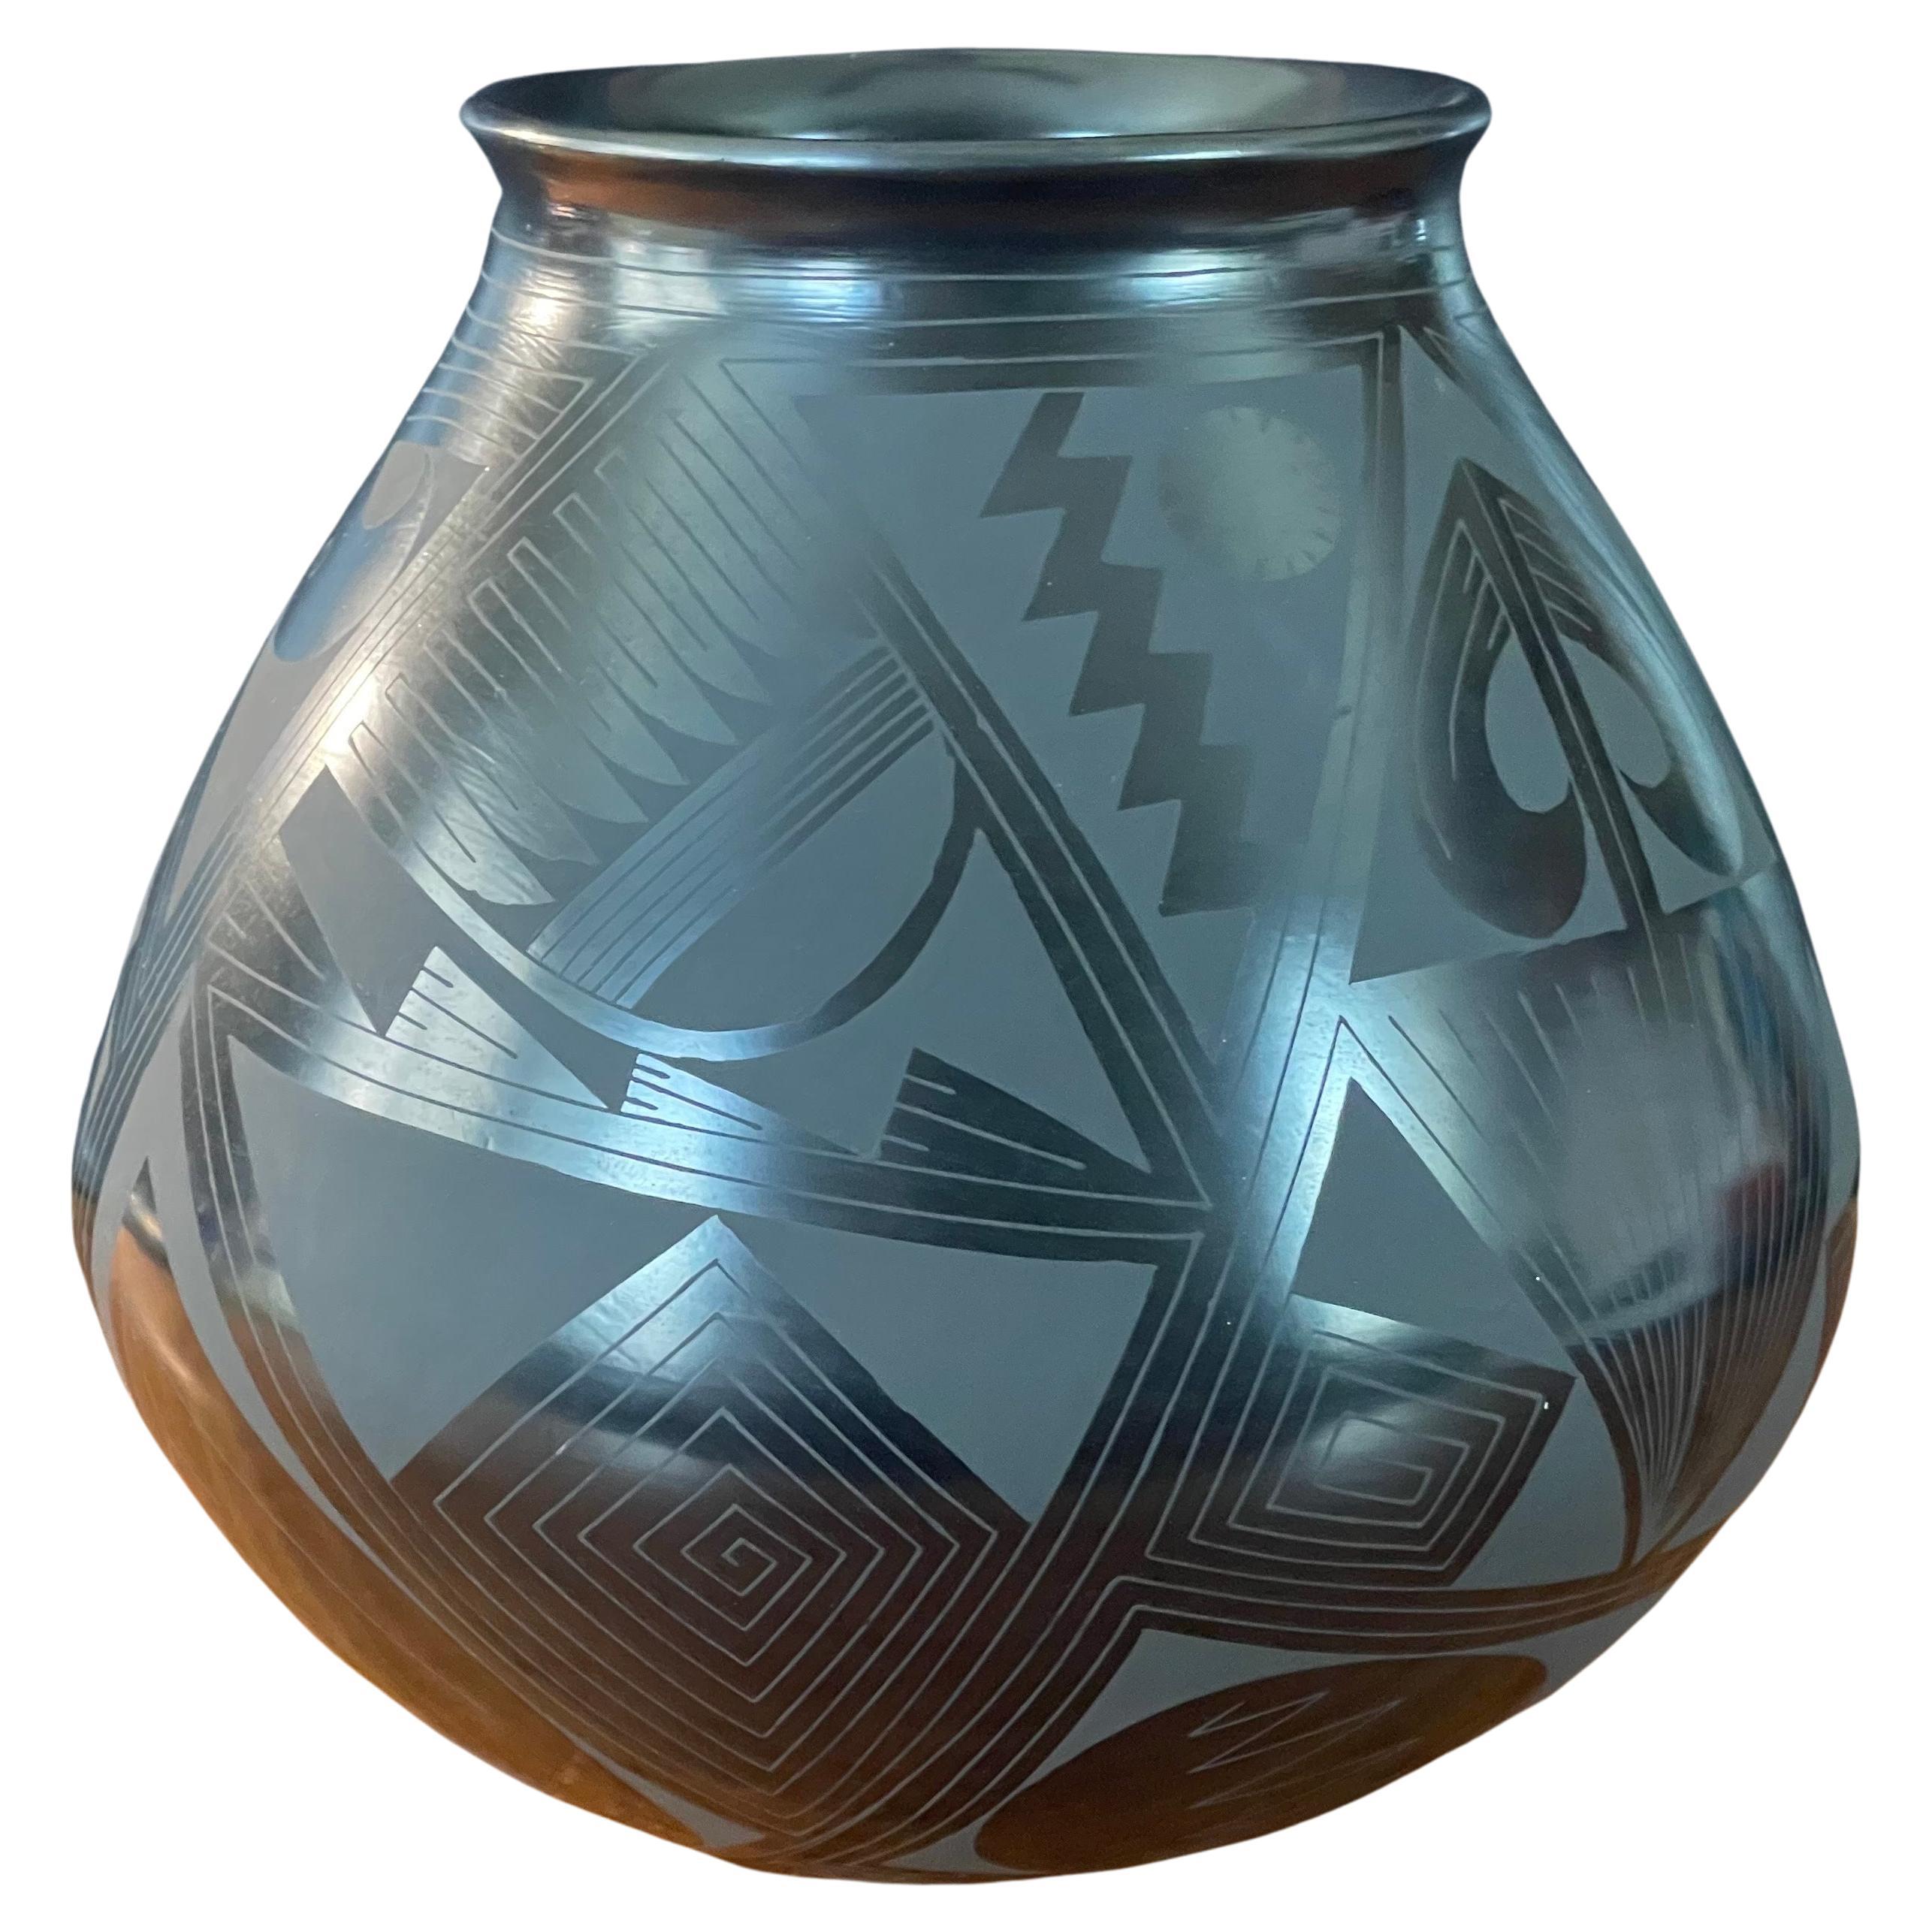 Beautiful hand-turned geometric blackware vase by Octavio Andrew, circa 2000s. The exquisite piece made of naturally black clay has a unique geometric design. This vase is in very good condition and measures 6.5